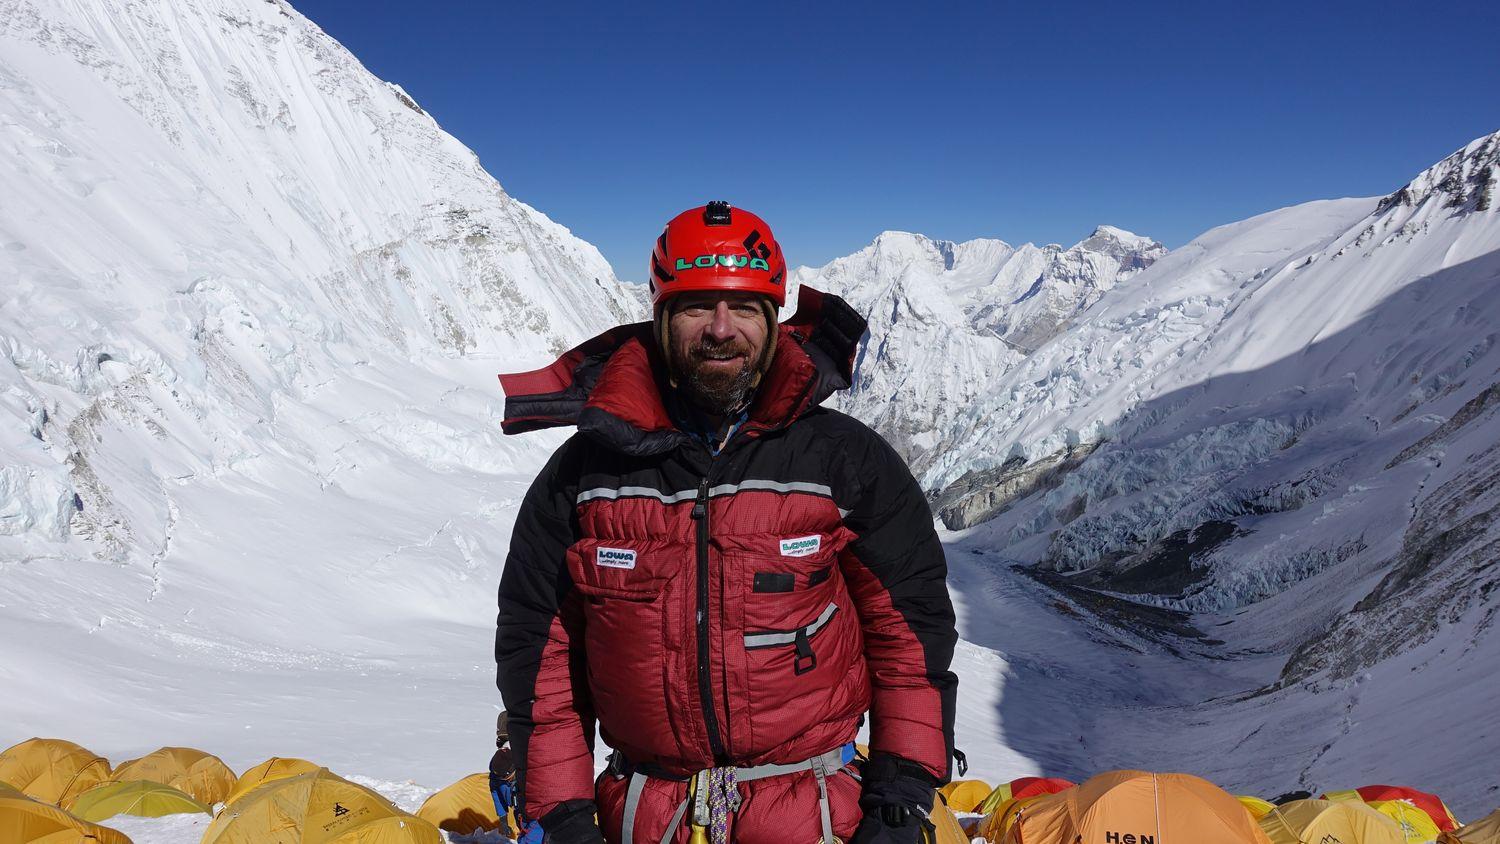 Jim Davidson Tells the Story Behind His New Book: The Next Everest